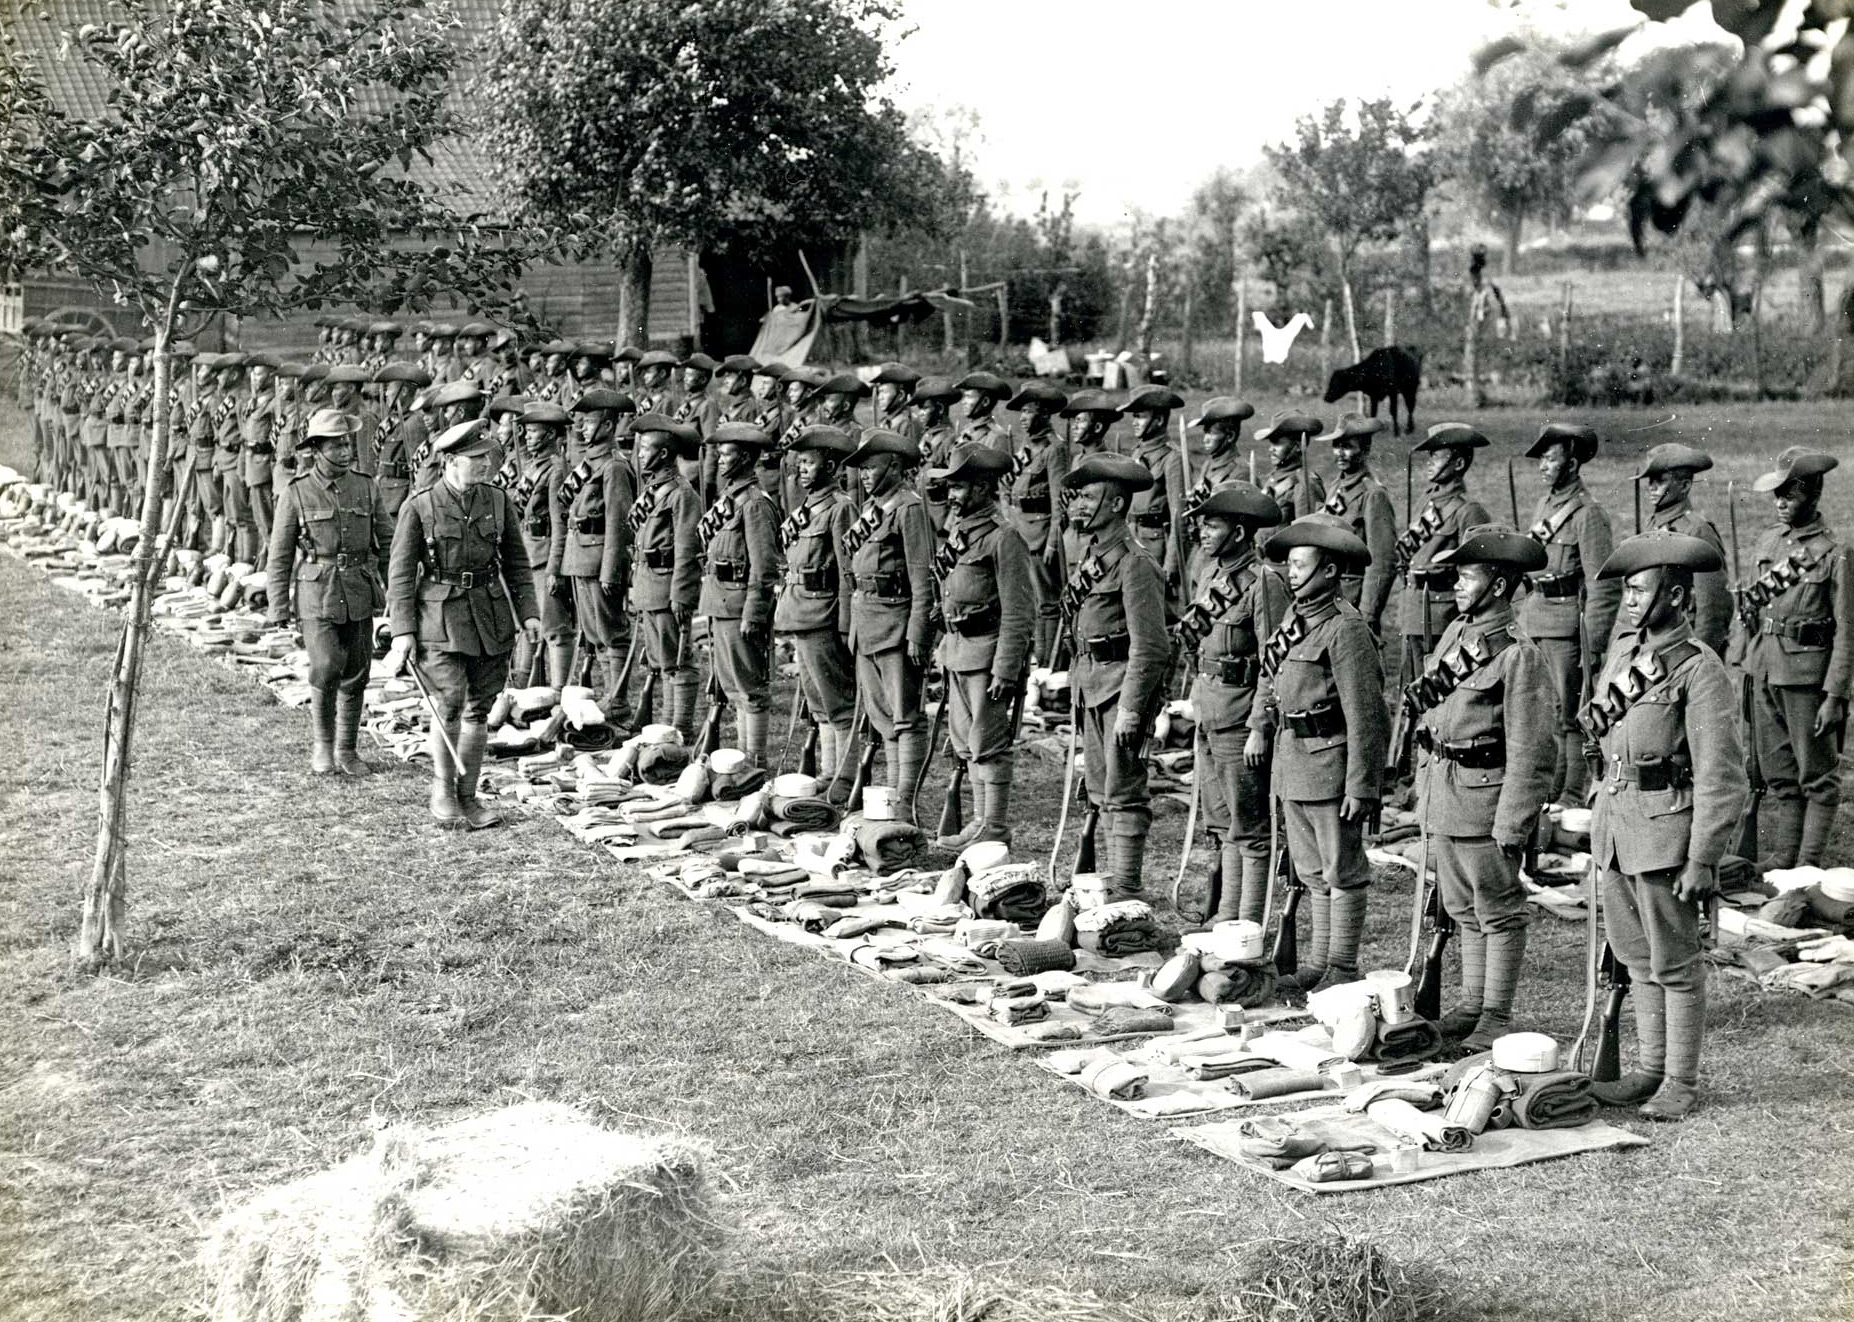 1st battalion of the 4th Ghurkha Rifles lined up for kit inspection.